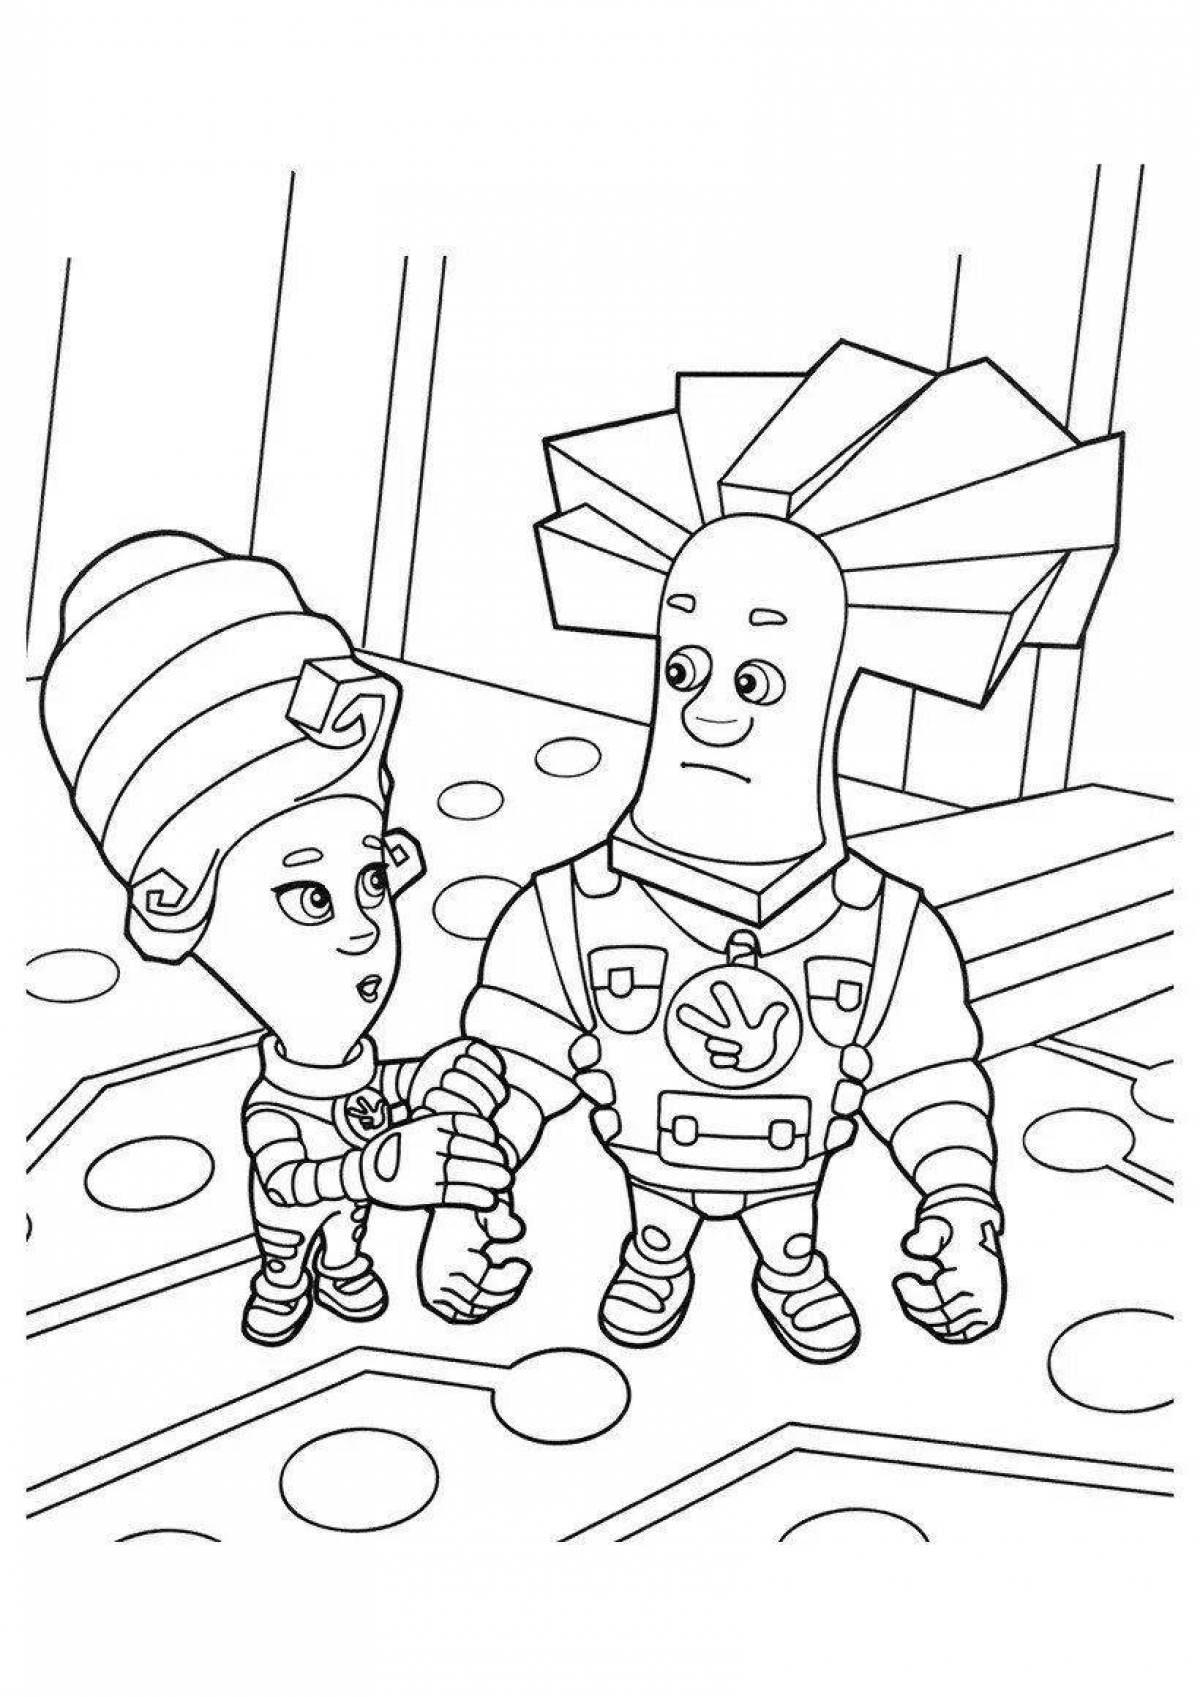 Coloring page magnificent papus